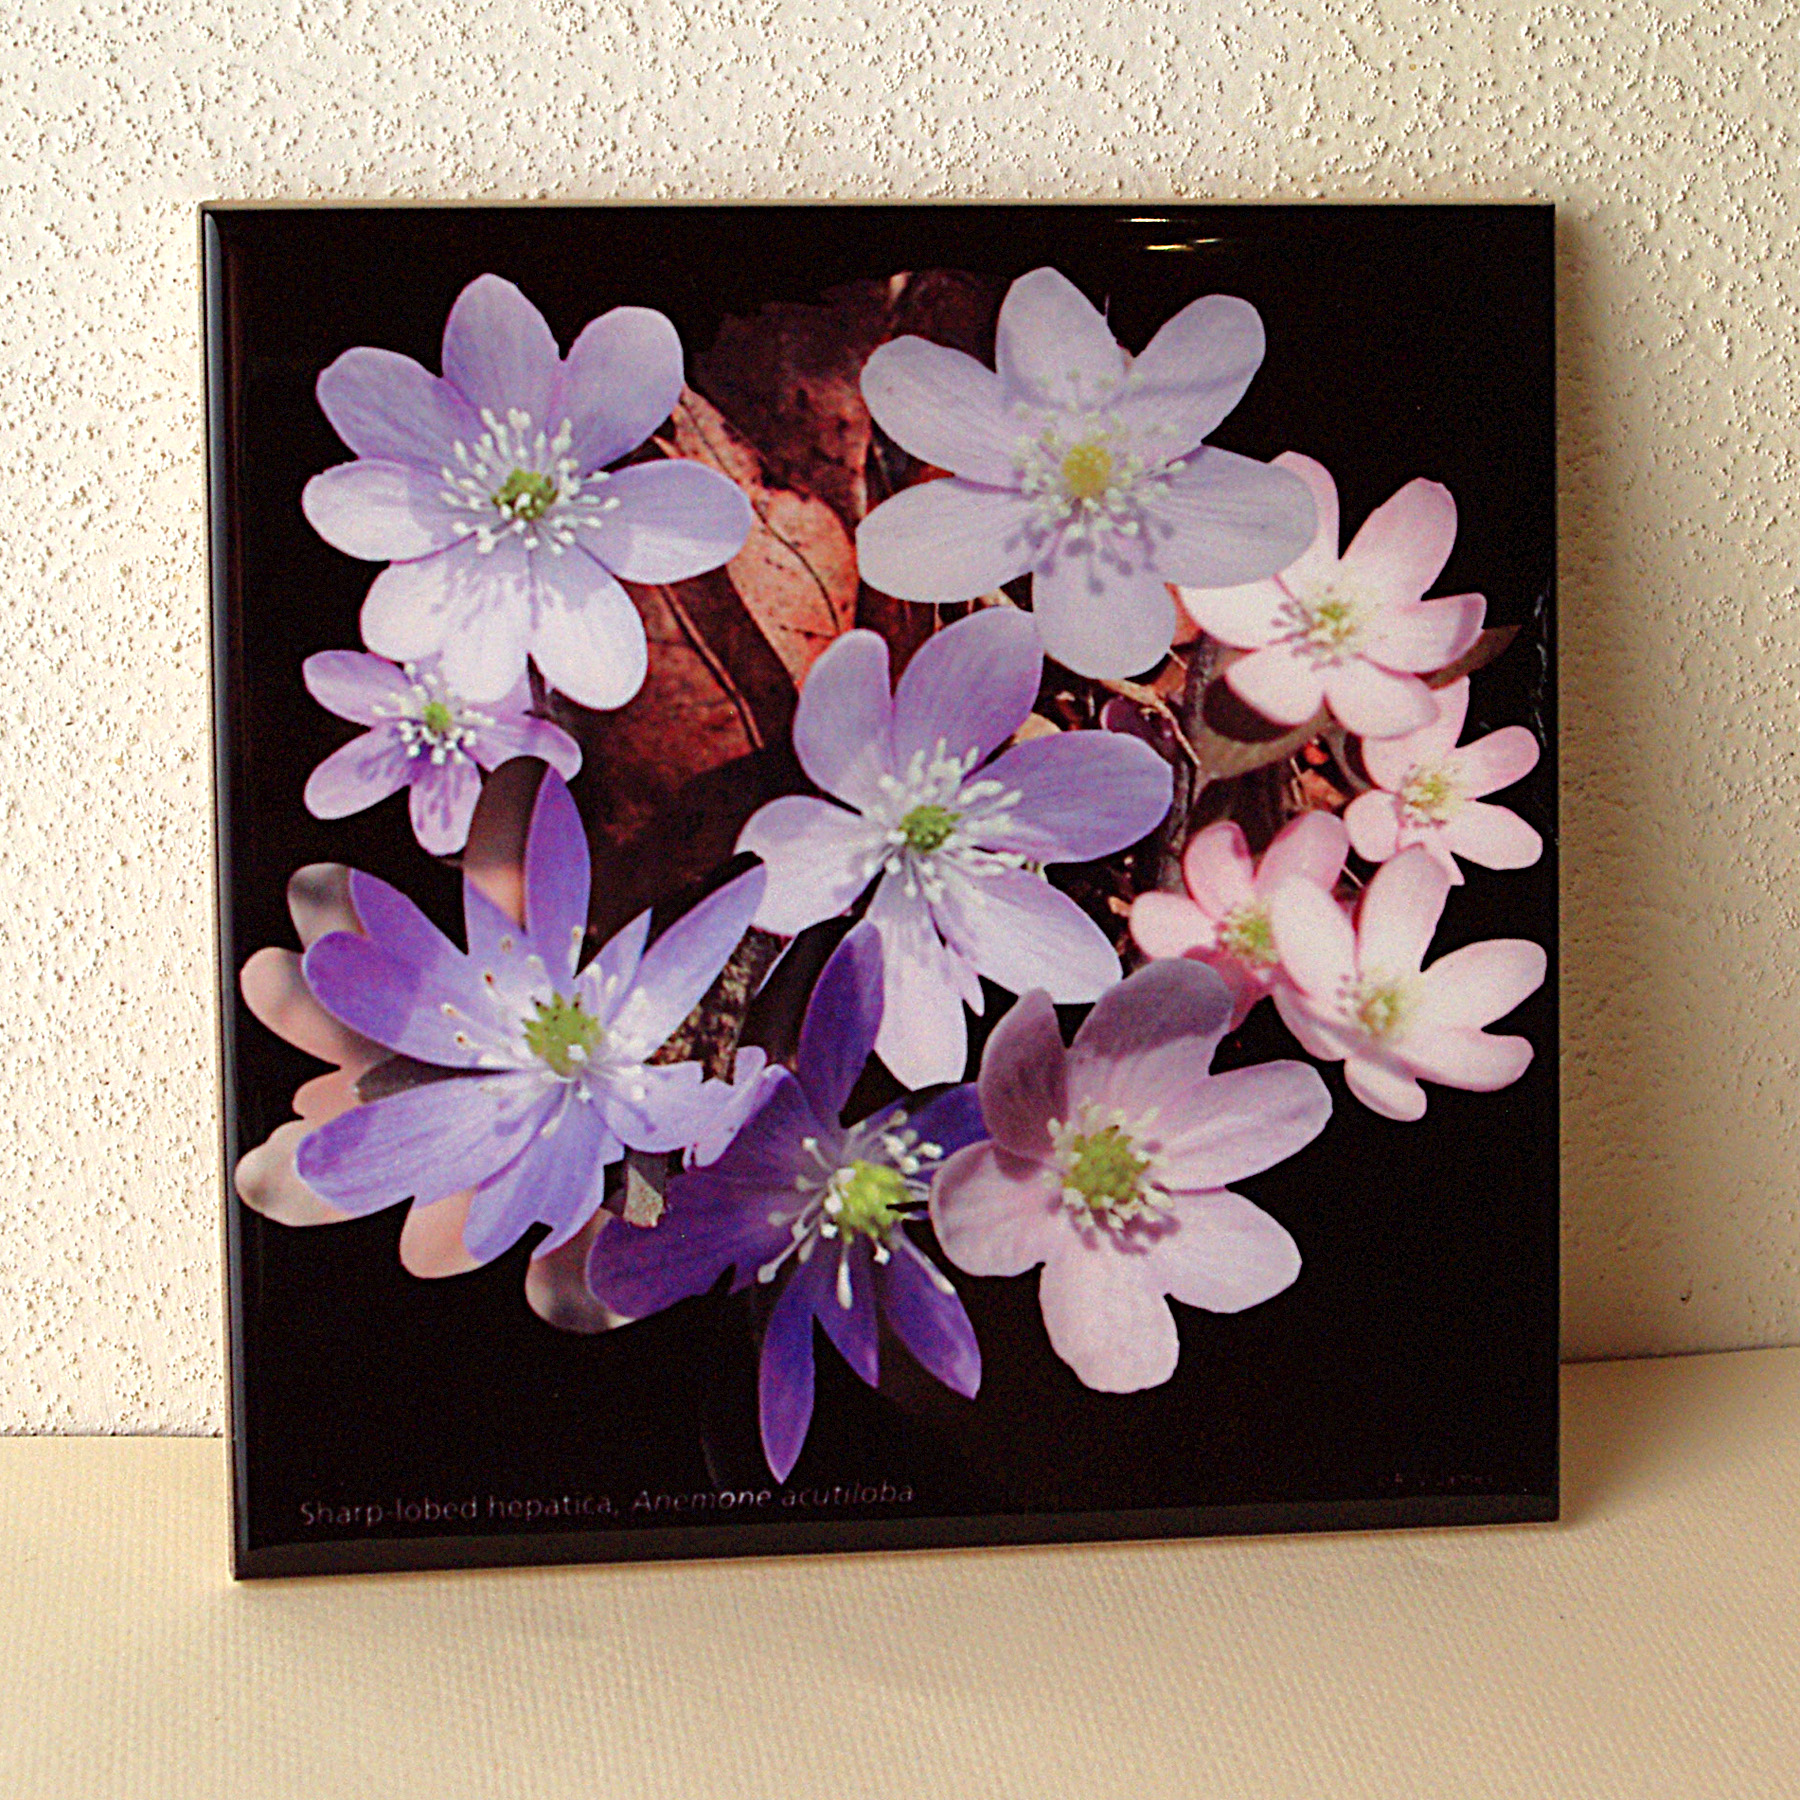 Tiles with flower power made with sublimation printing